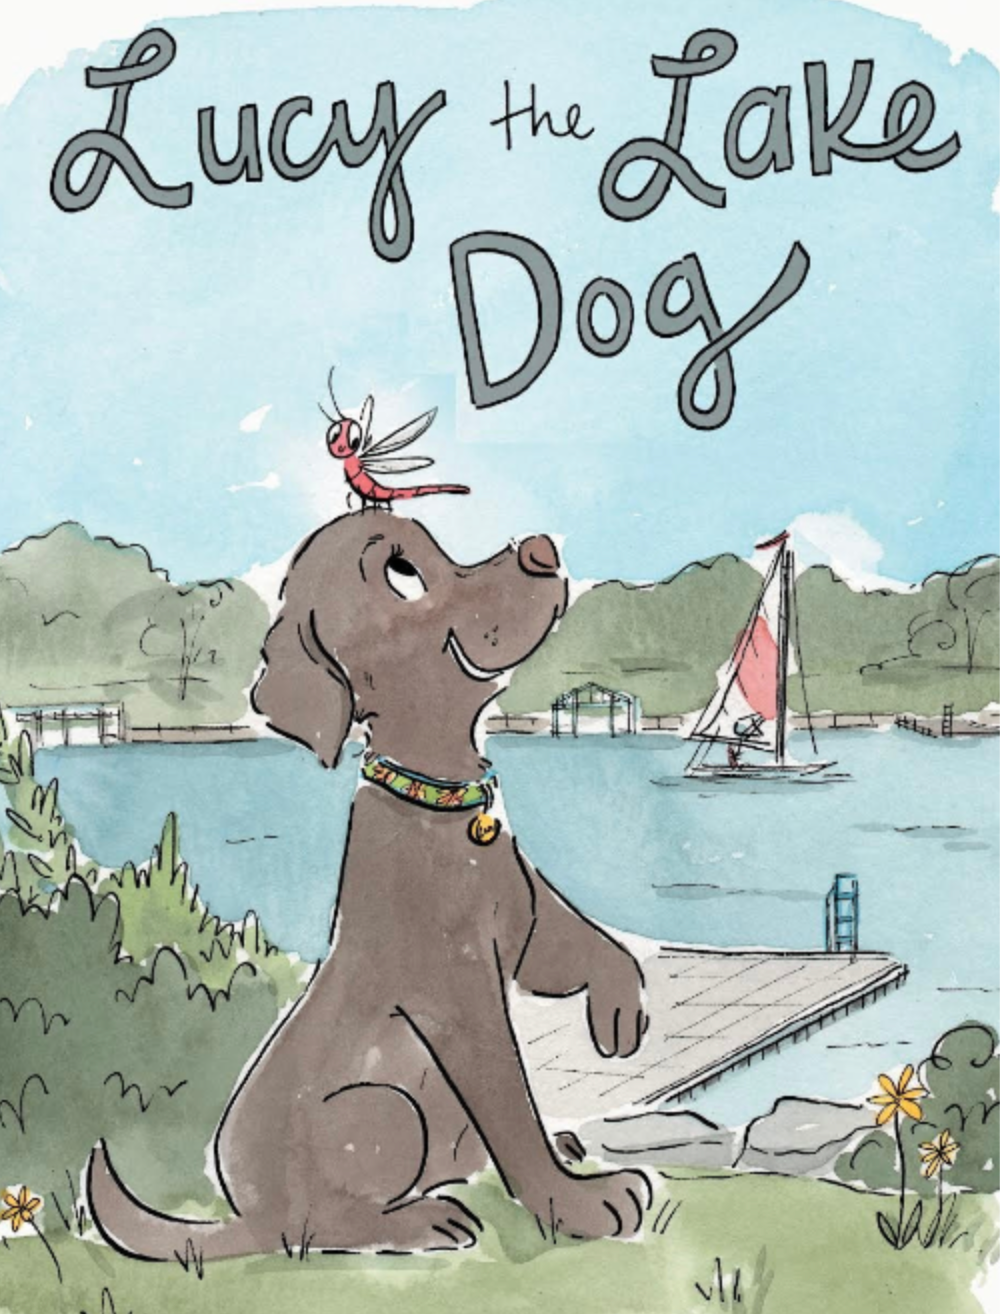 "Lucy the Lake Dog" Book